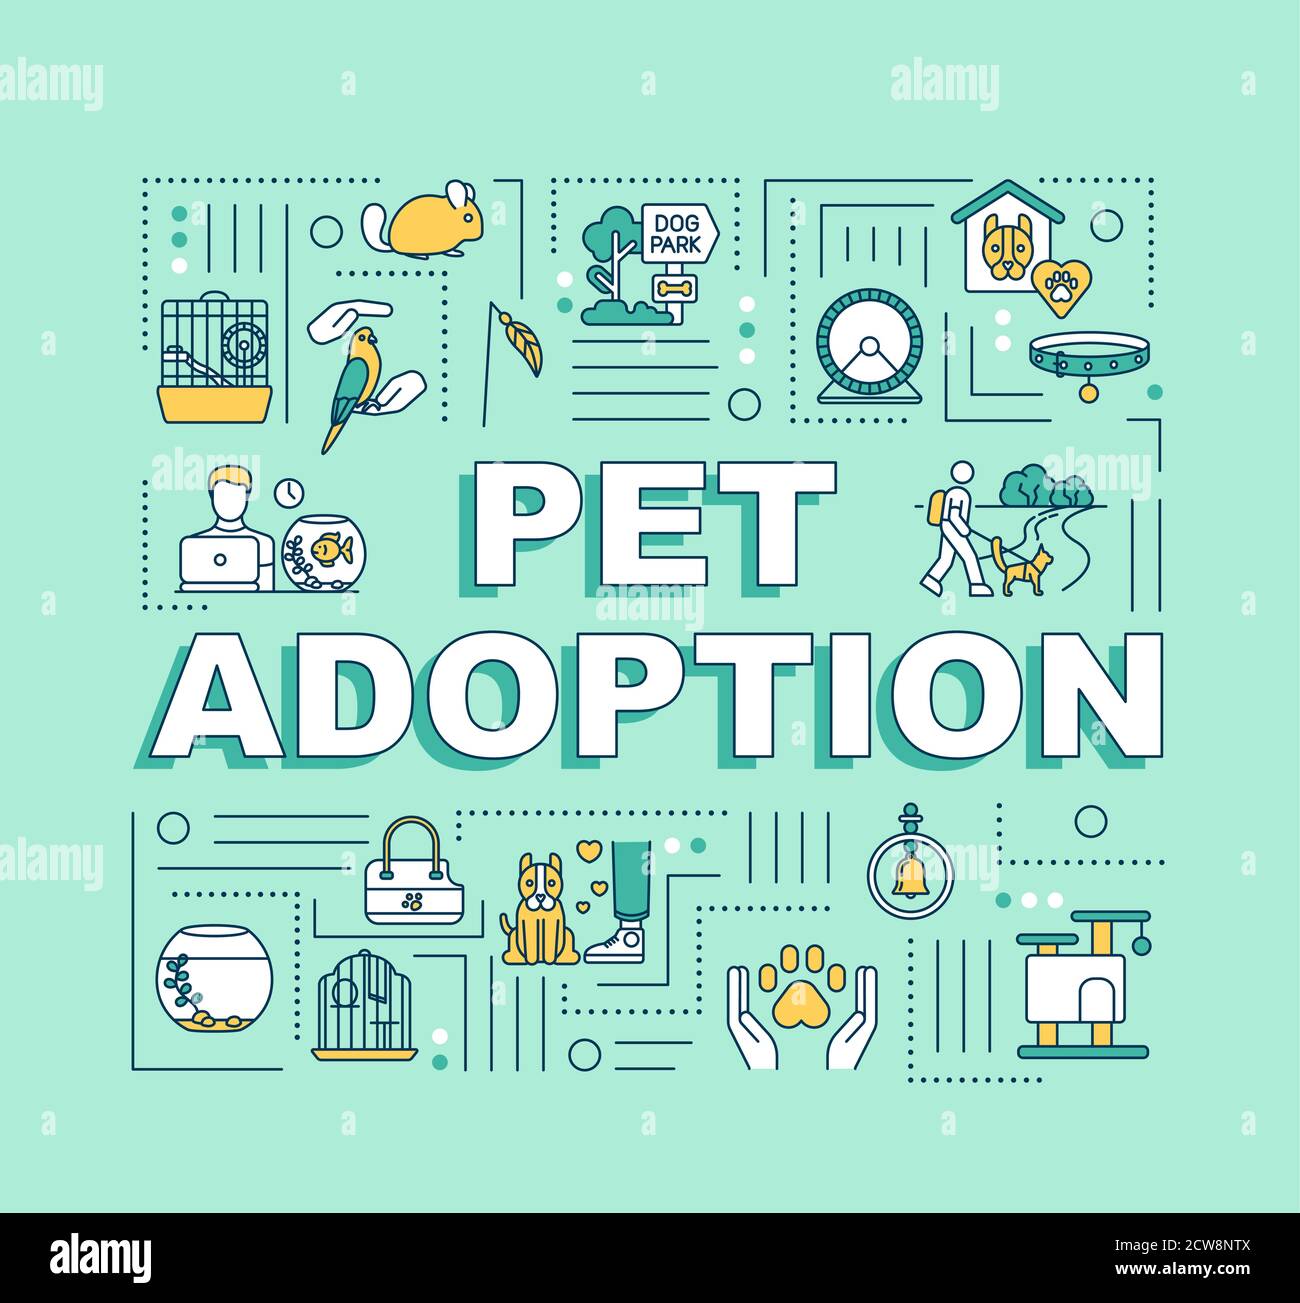 Pet adoption word concepts banner Stock Vector